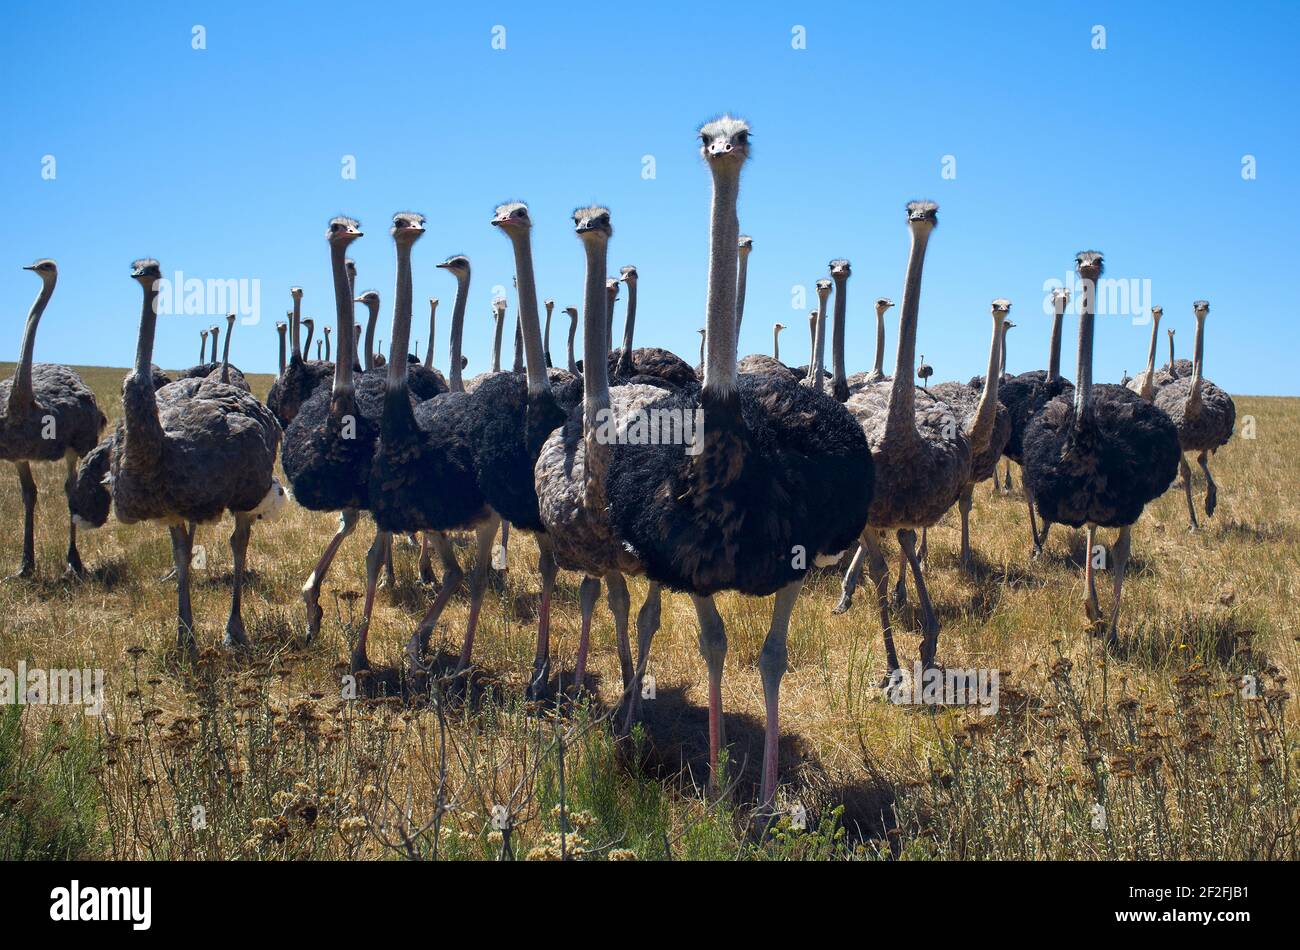 A pride of ostriches on pasture Stock Photo